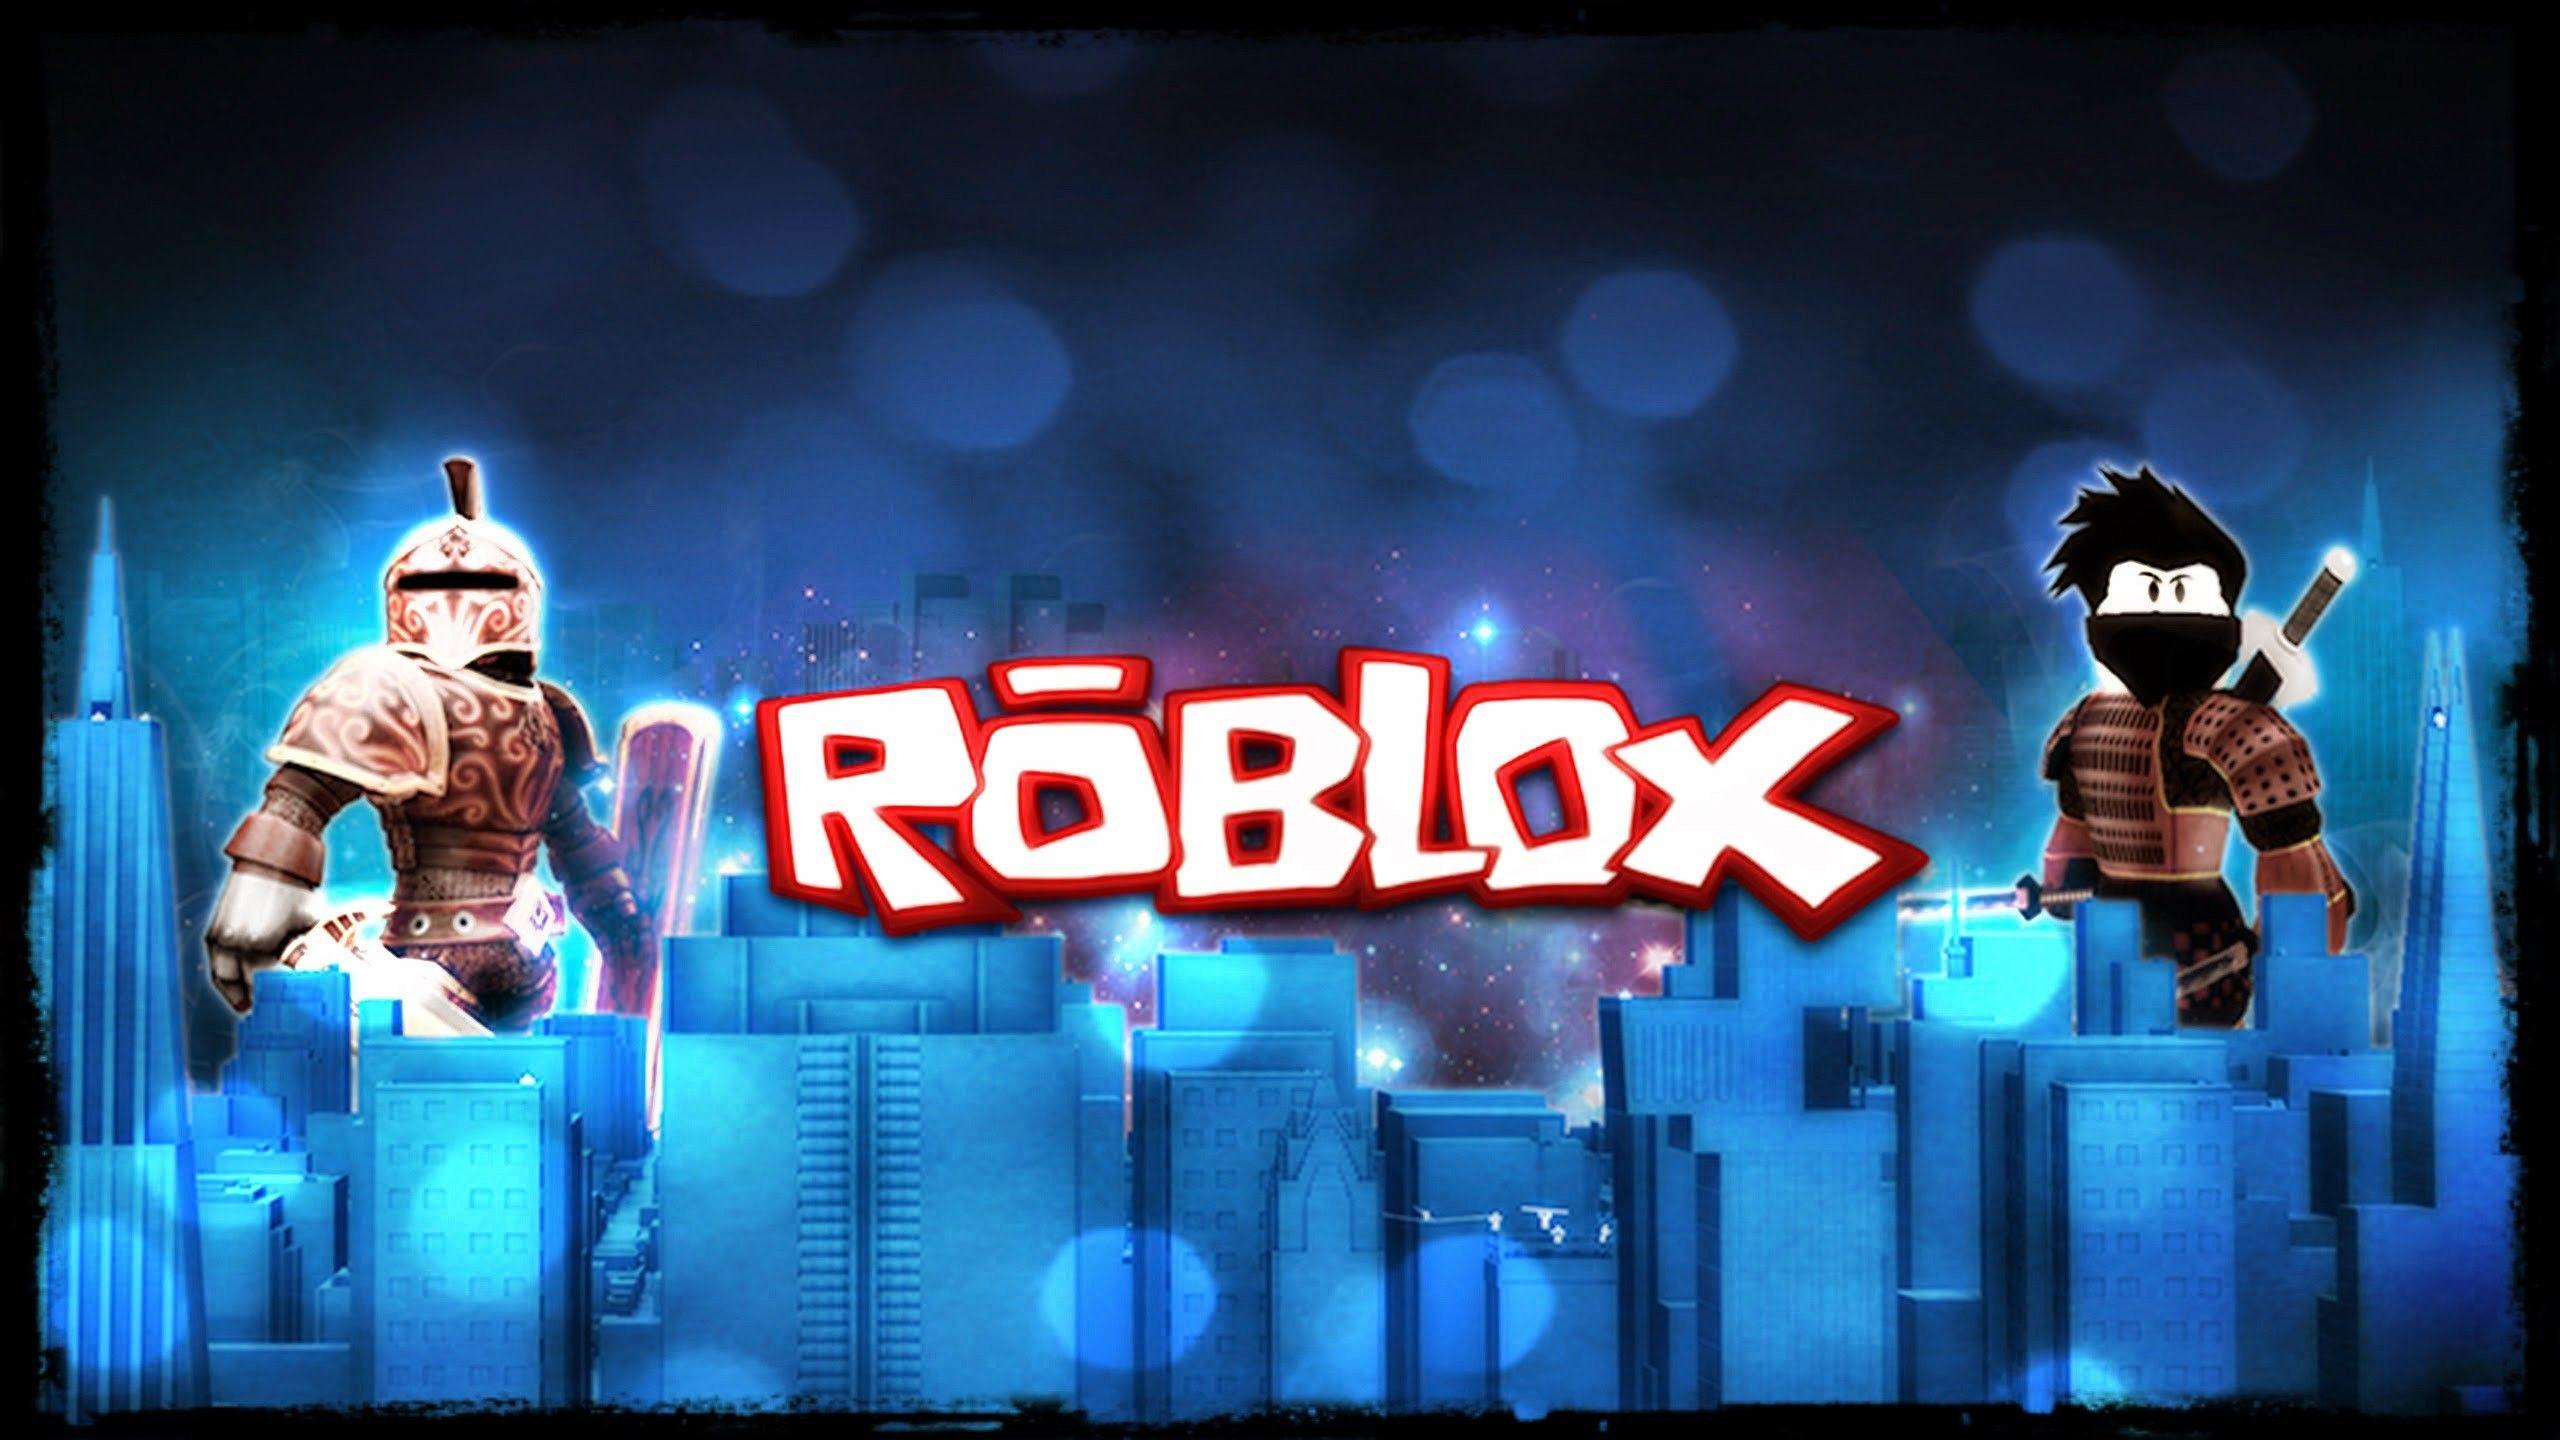 Robux Logo Hd - robux wallpaper posted by sarah peltier